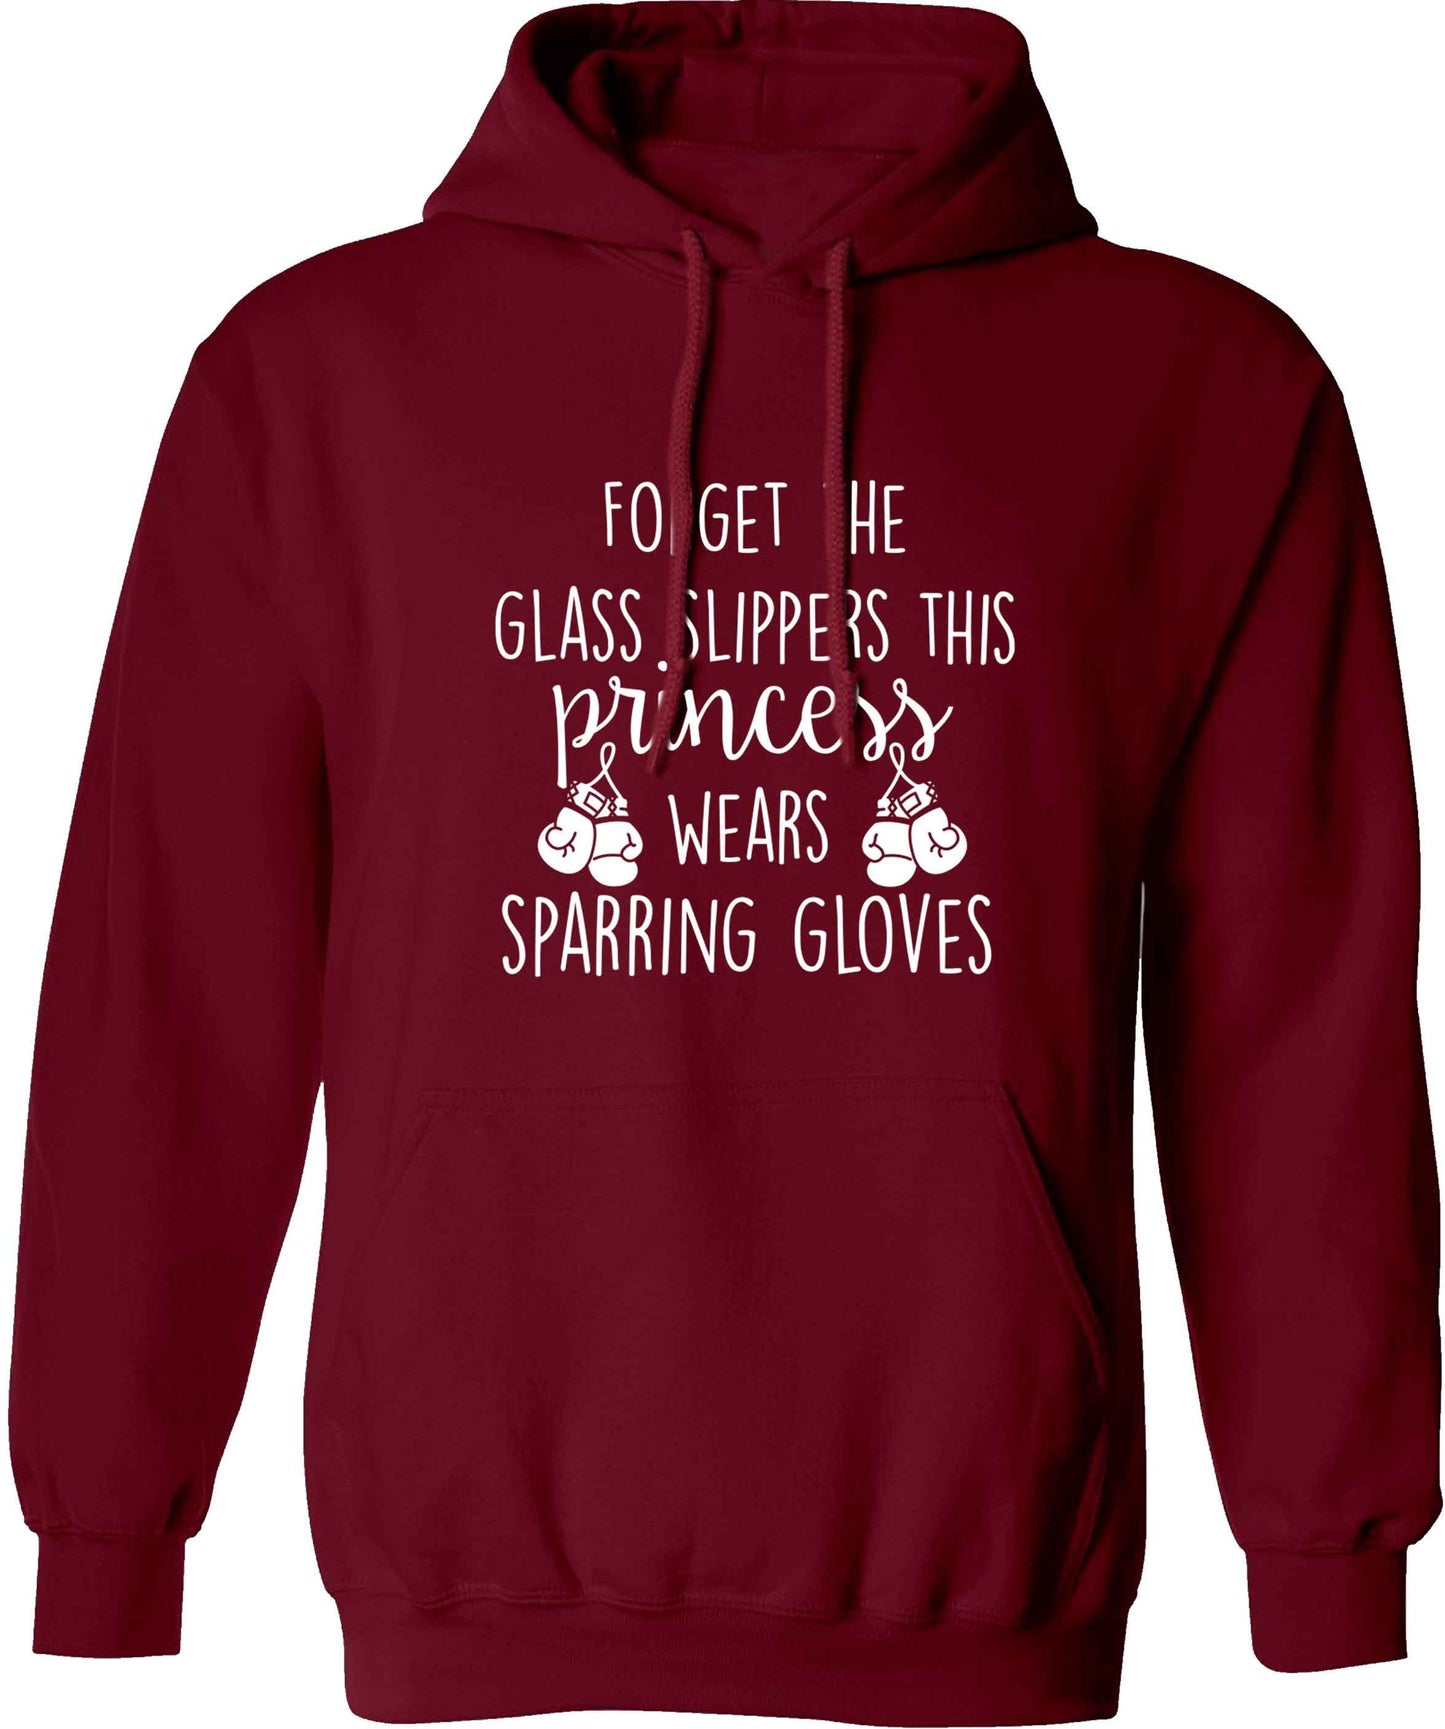 Forget the glass slippers this princess wears sparring gloves adults unisex maroon hoodie 2XL